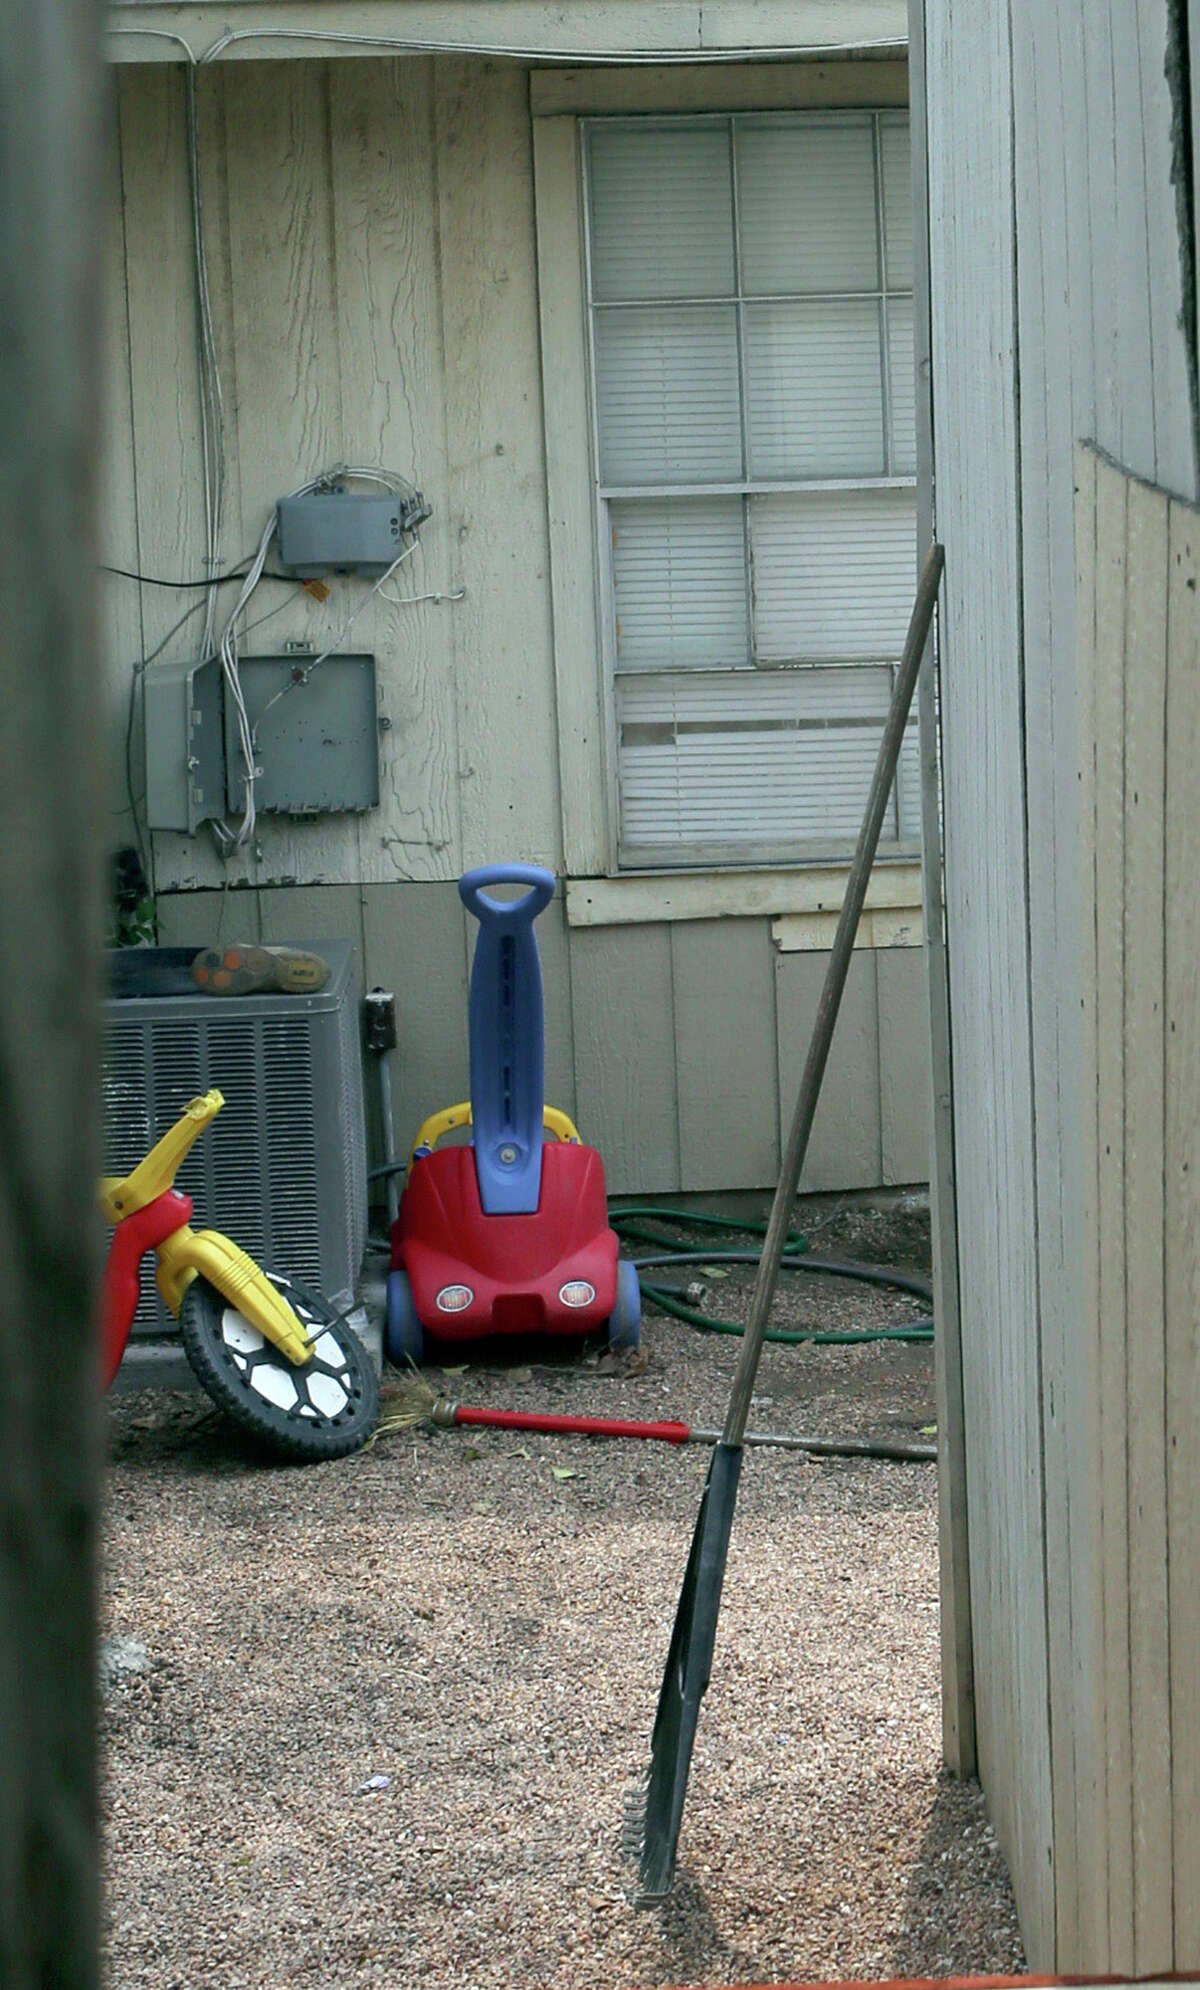 This is the back yard of the townhouse at 8105 Chipping in San Antonio, Texas, Friday, April 29, 2016, where children were allegedly chained up in the back yard. Authorities say they have arrested a woman who is the mother of six of eight children who were found unsupervised in the middle of the night at a San Antonio home. A spokesman for the Bexar County sheriff's office says the 34-year-old woman also was supposed to be looking after two other children who were found tied up in the backyard. (John Davenport/The San Antonio Express-News via AP)